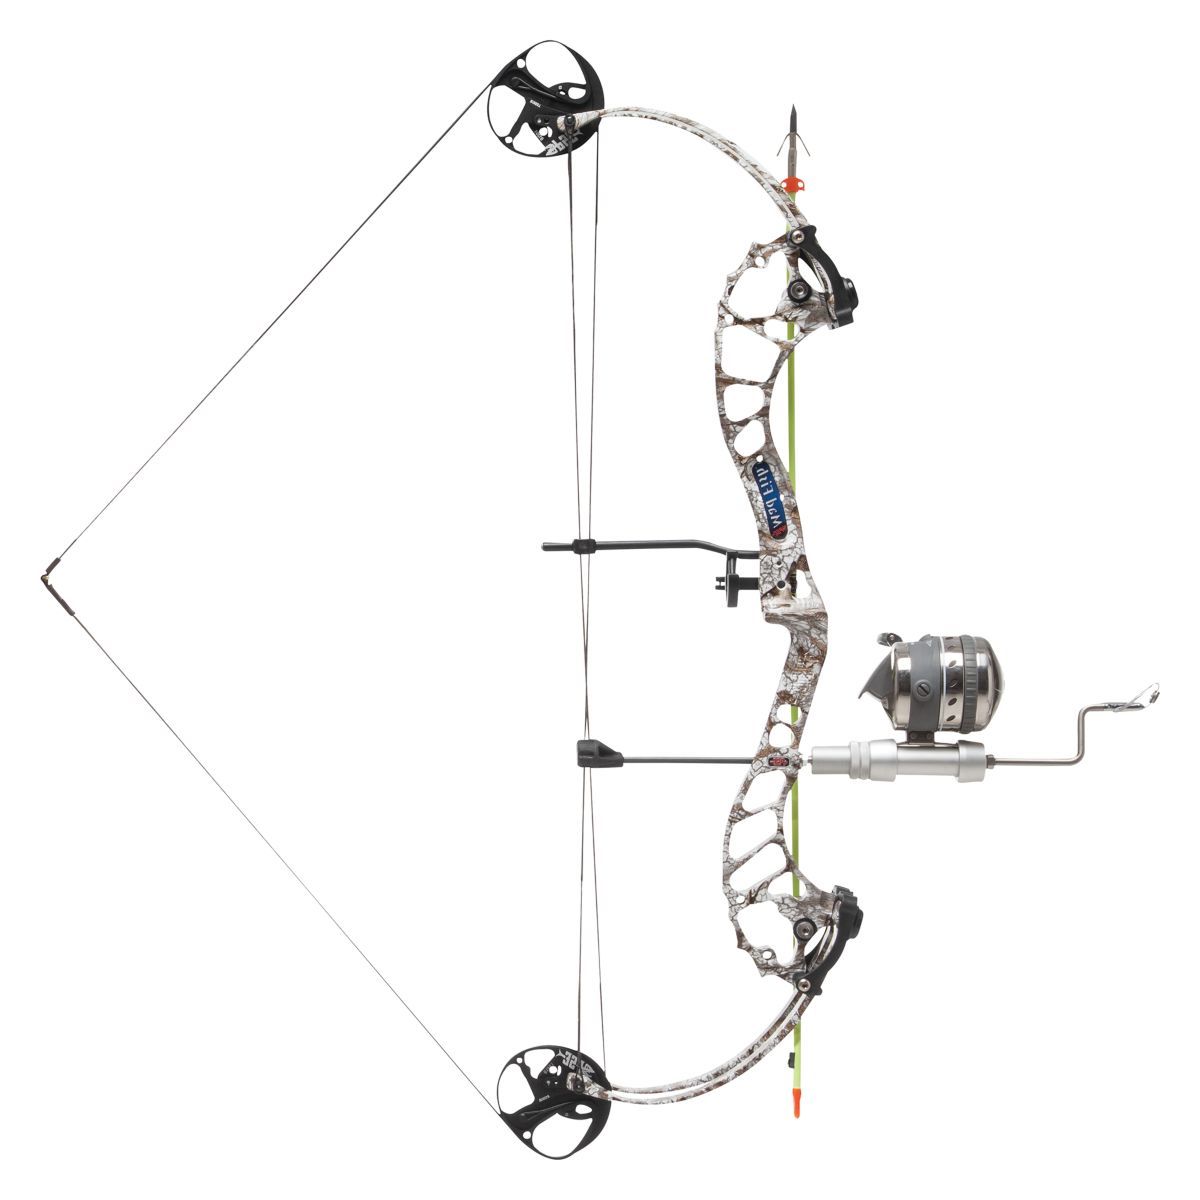 PSE® Archery Mad Fish Muzzy® Bowfishing Compound Bow Package